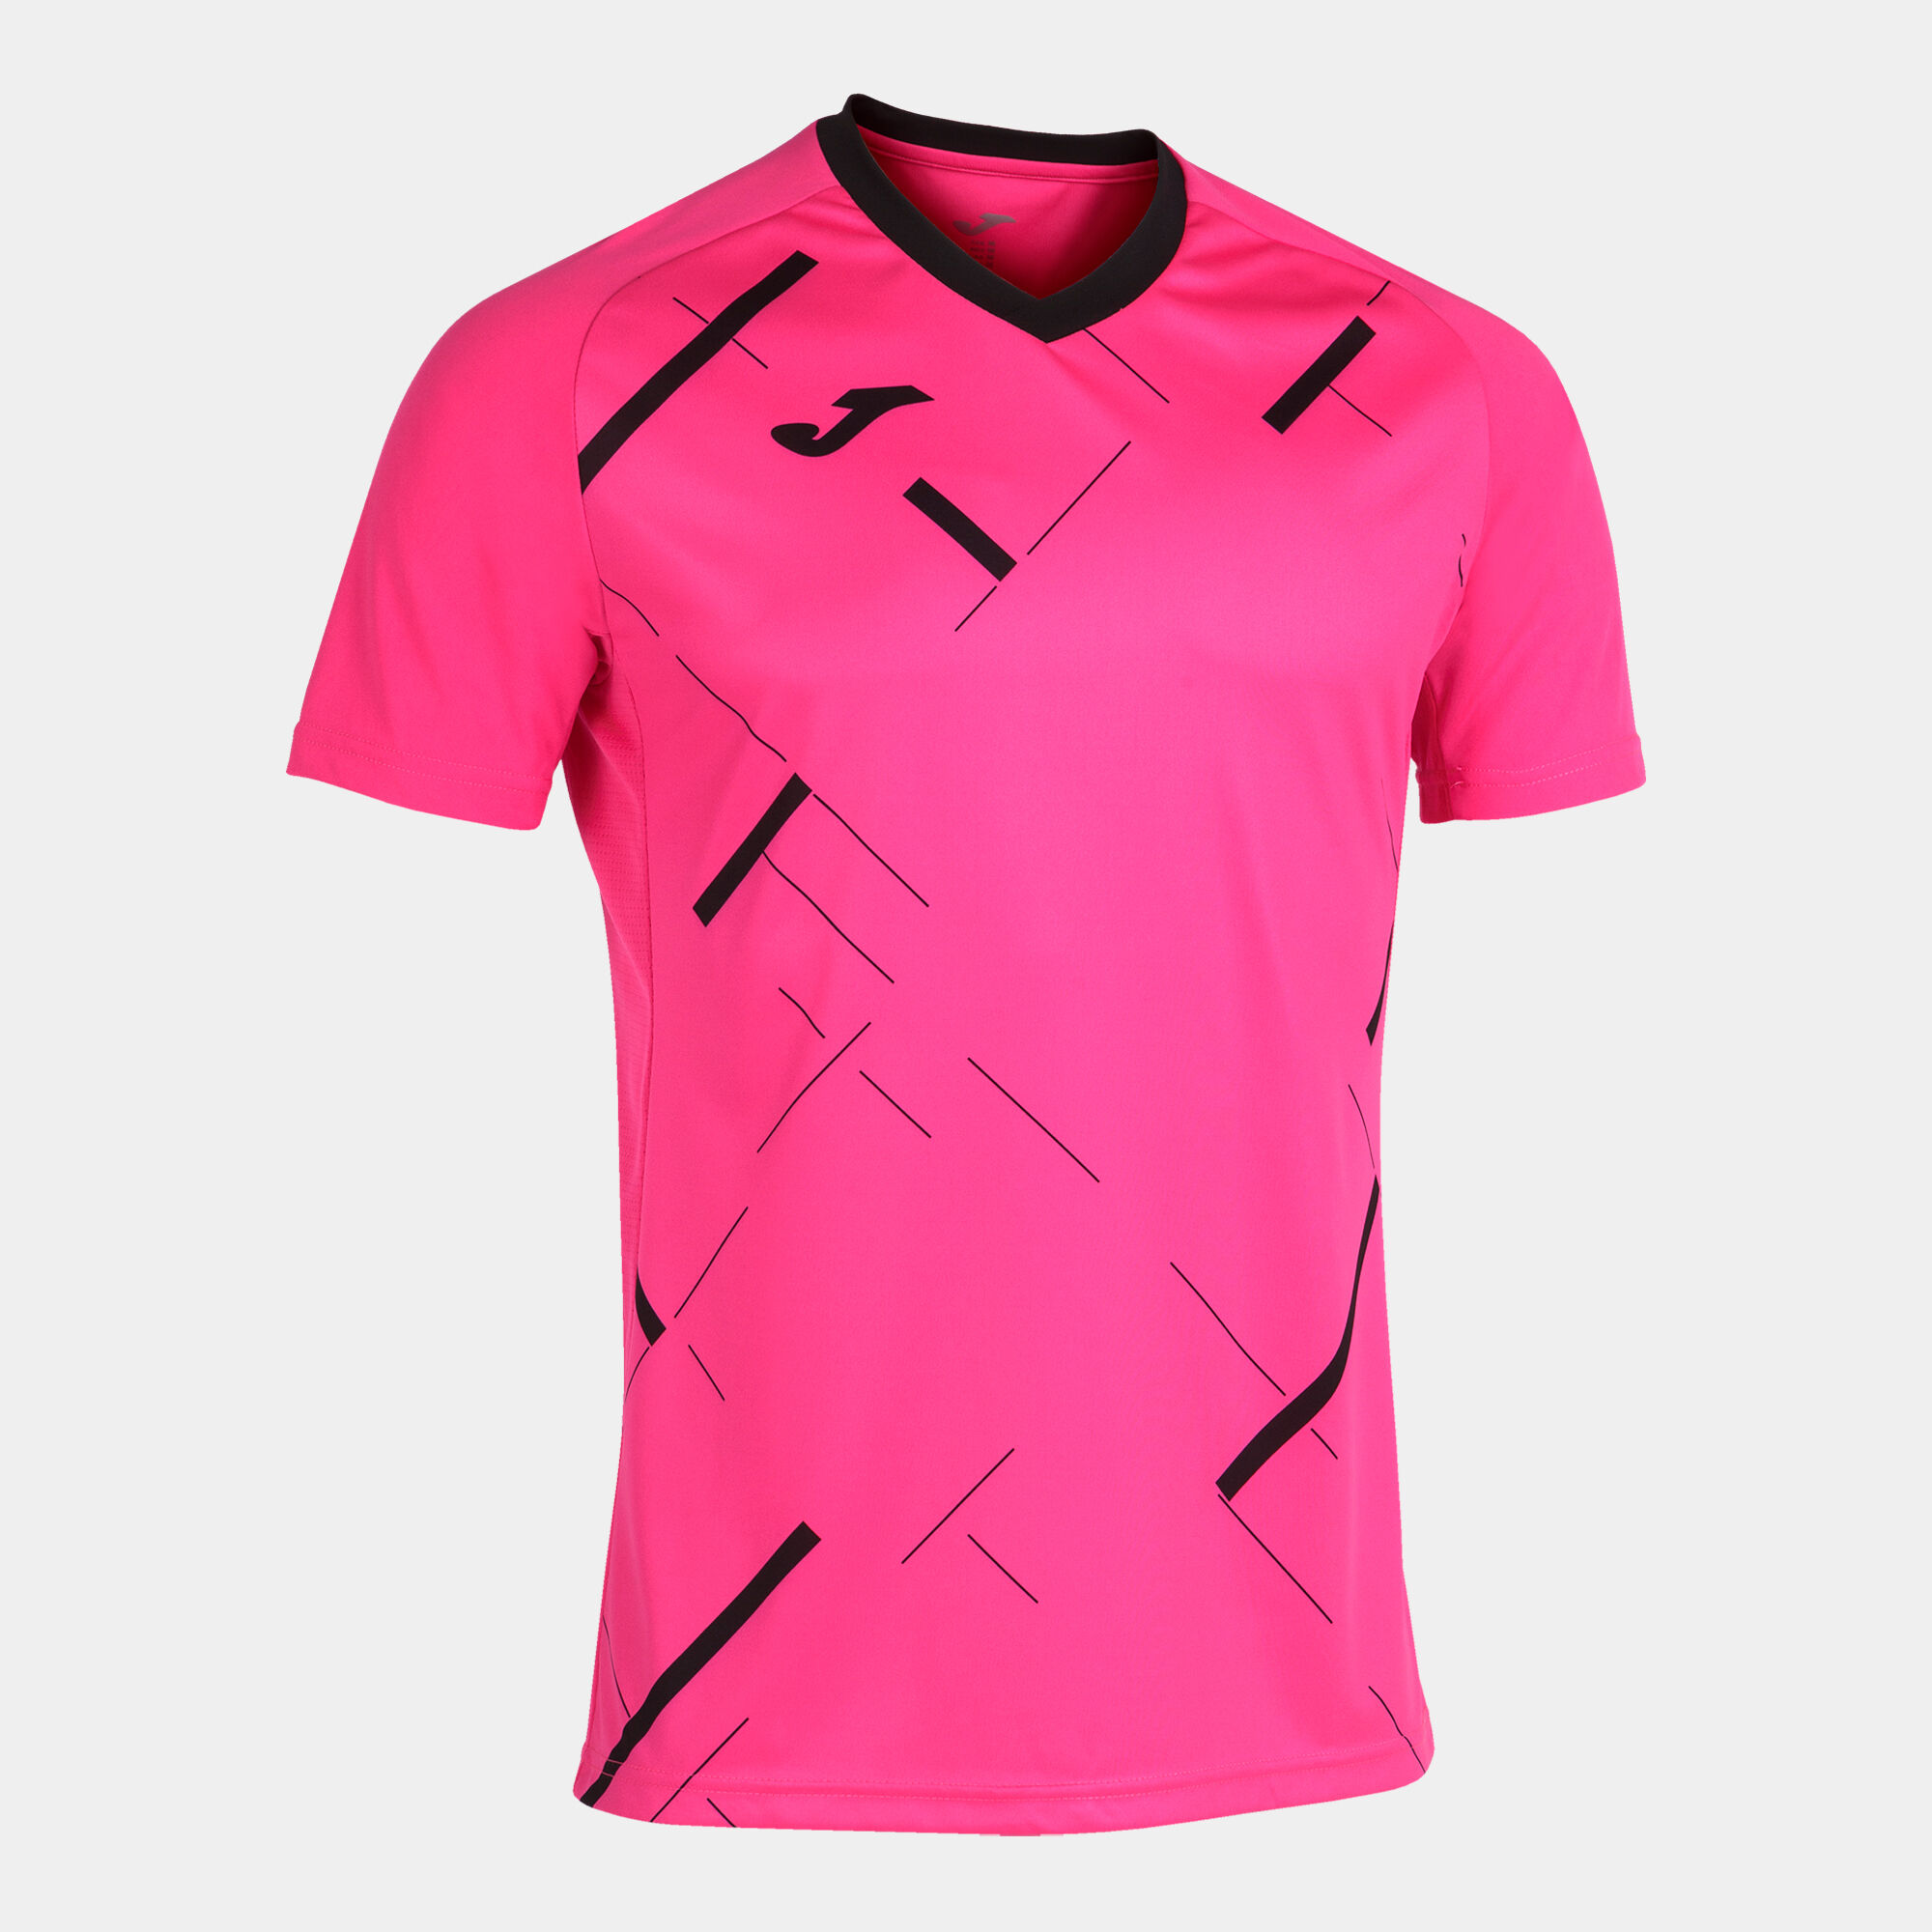 MAILLOT MANCHES COURTES HOMME TIGER III ROSE FLUO NOIR